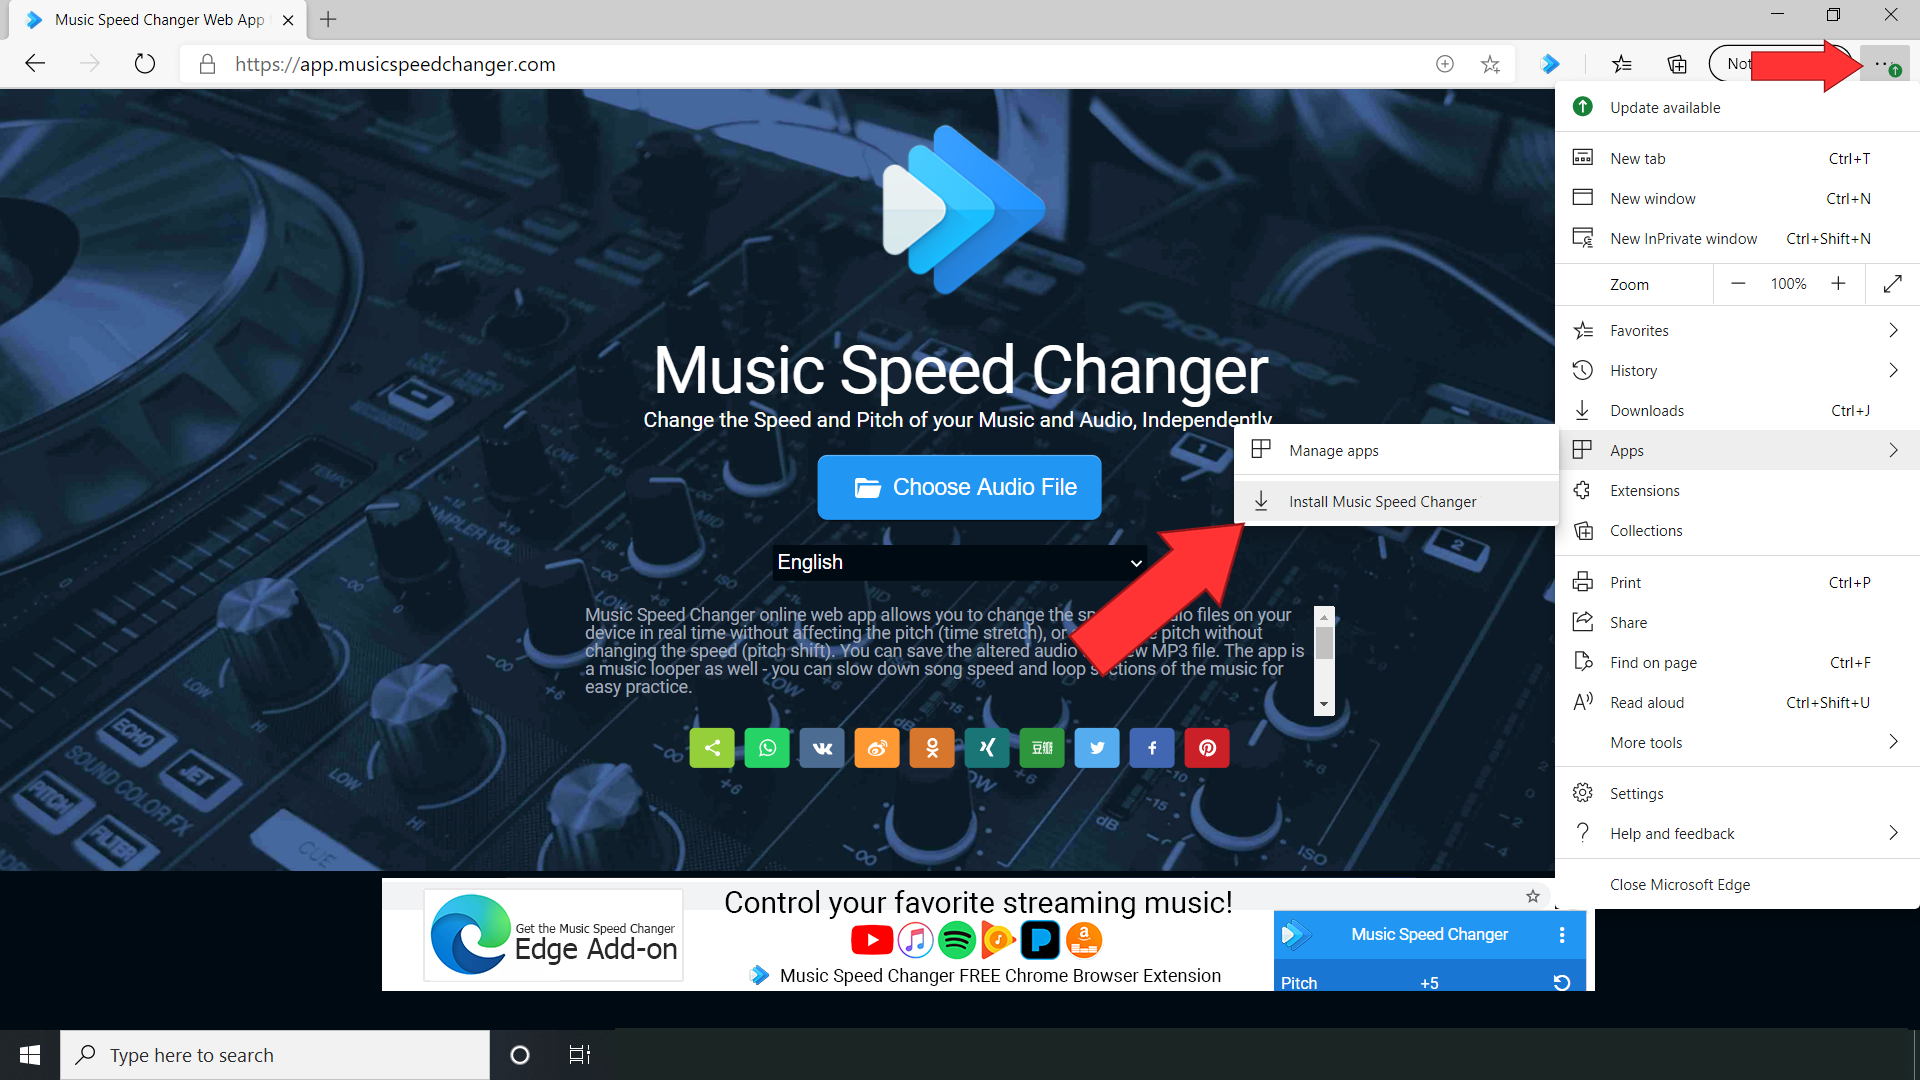 Install the Music Speed Changer Web App on your PC